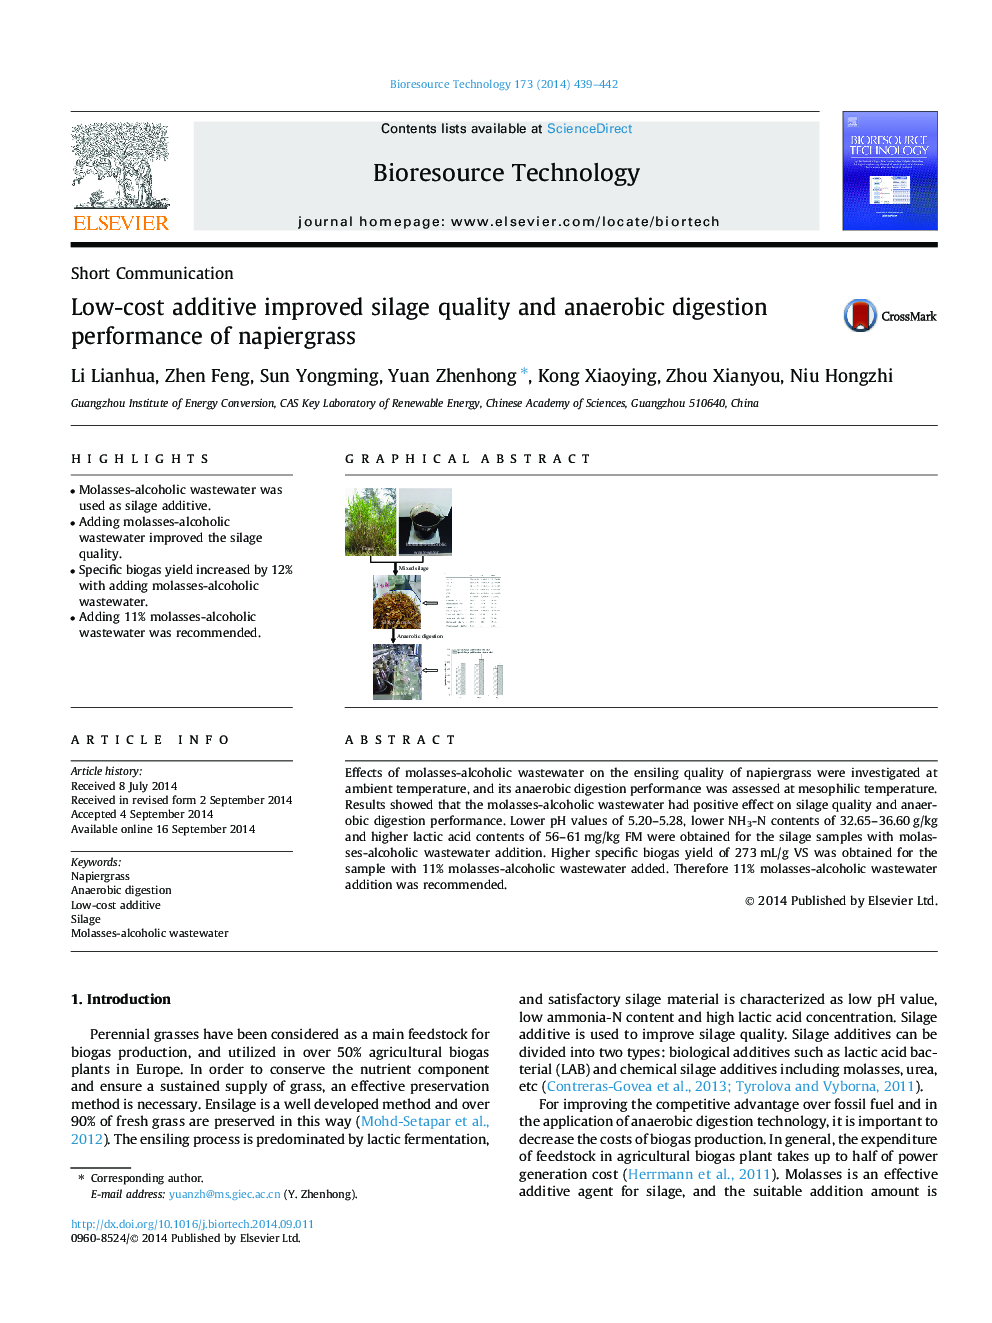 Low-cost additive improved silage quality and anaerobic digestion performance of napiergrass